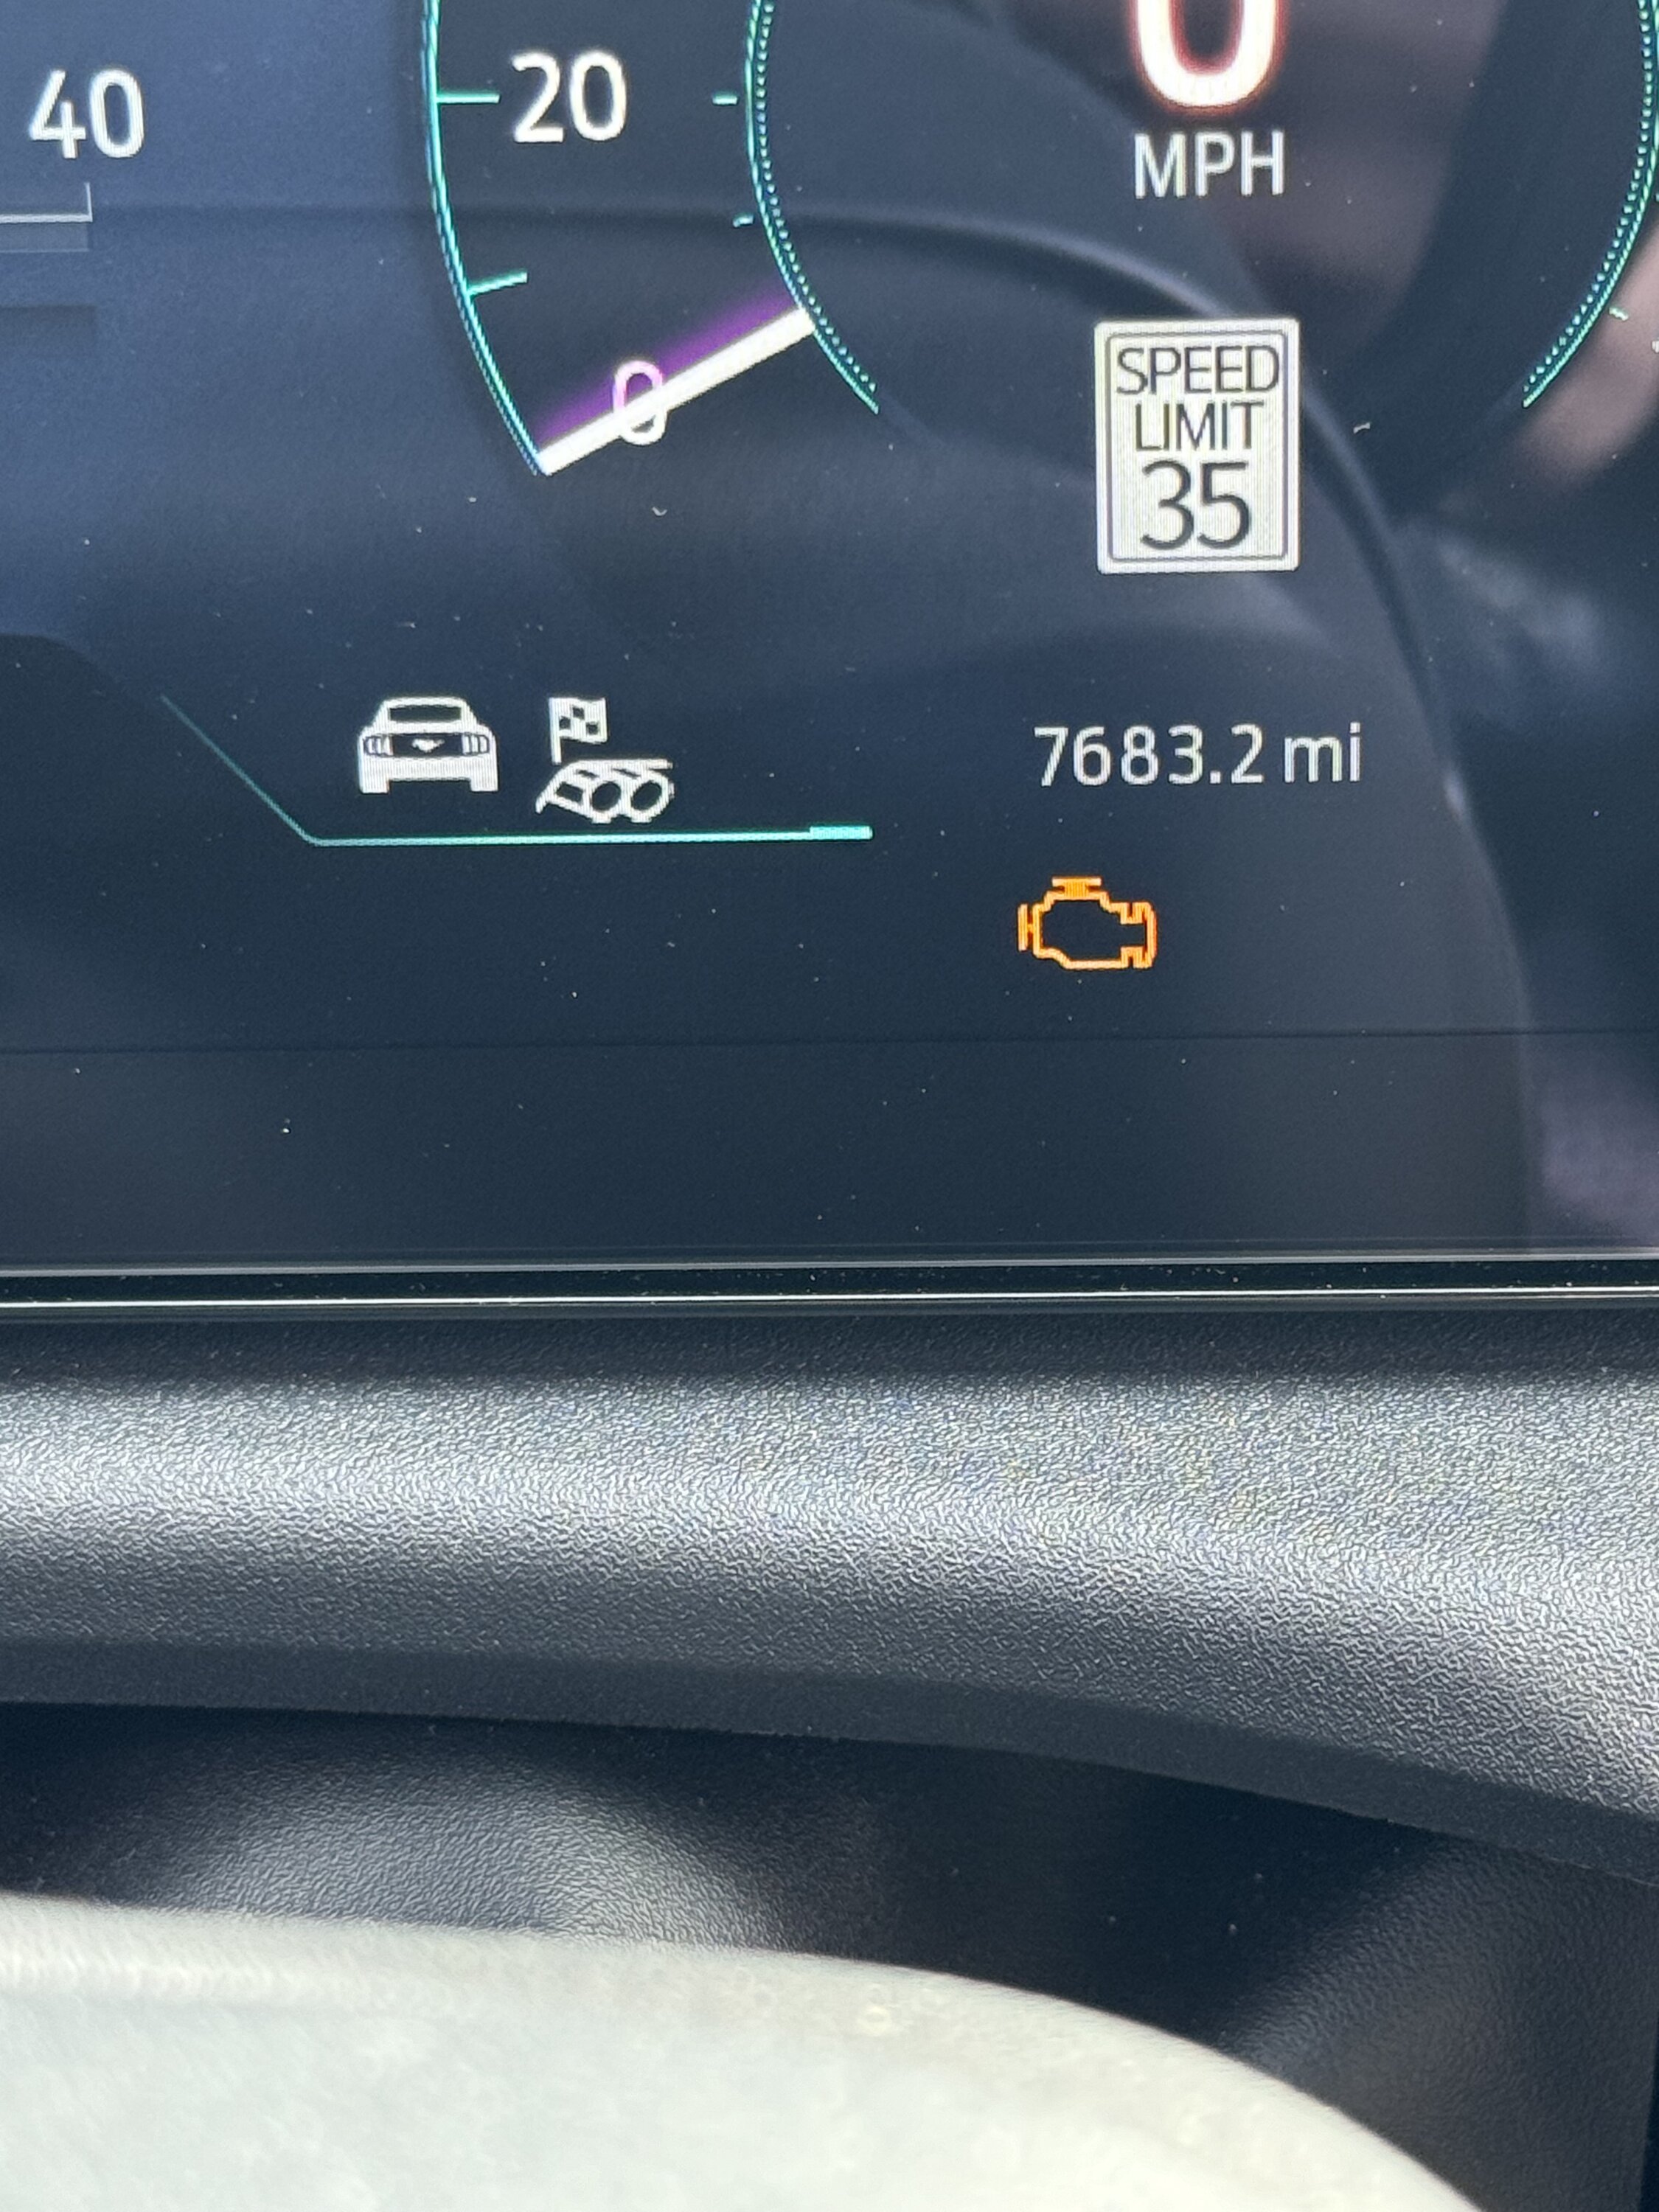 S650 Mustang Check engine light came on. 24 GT 6spd 7600mi IMG_0113